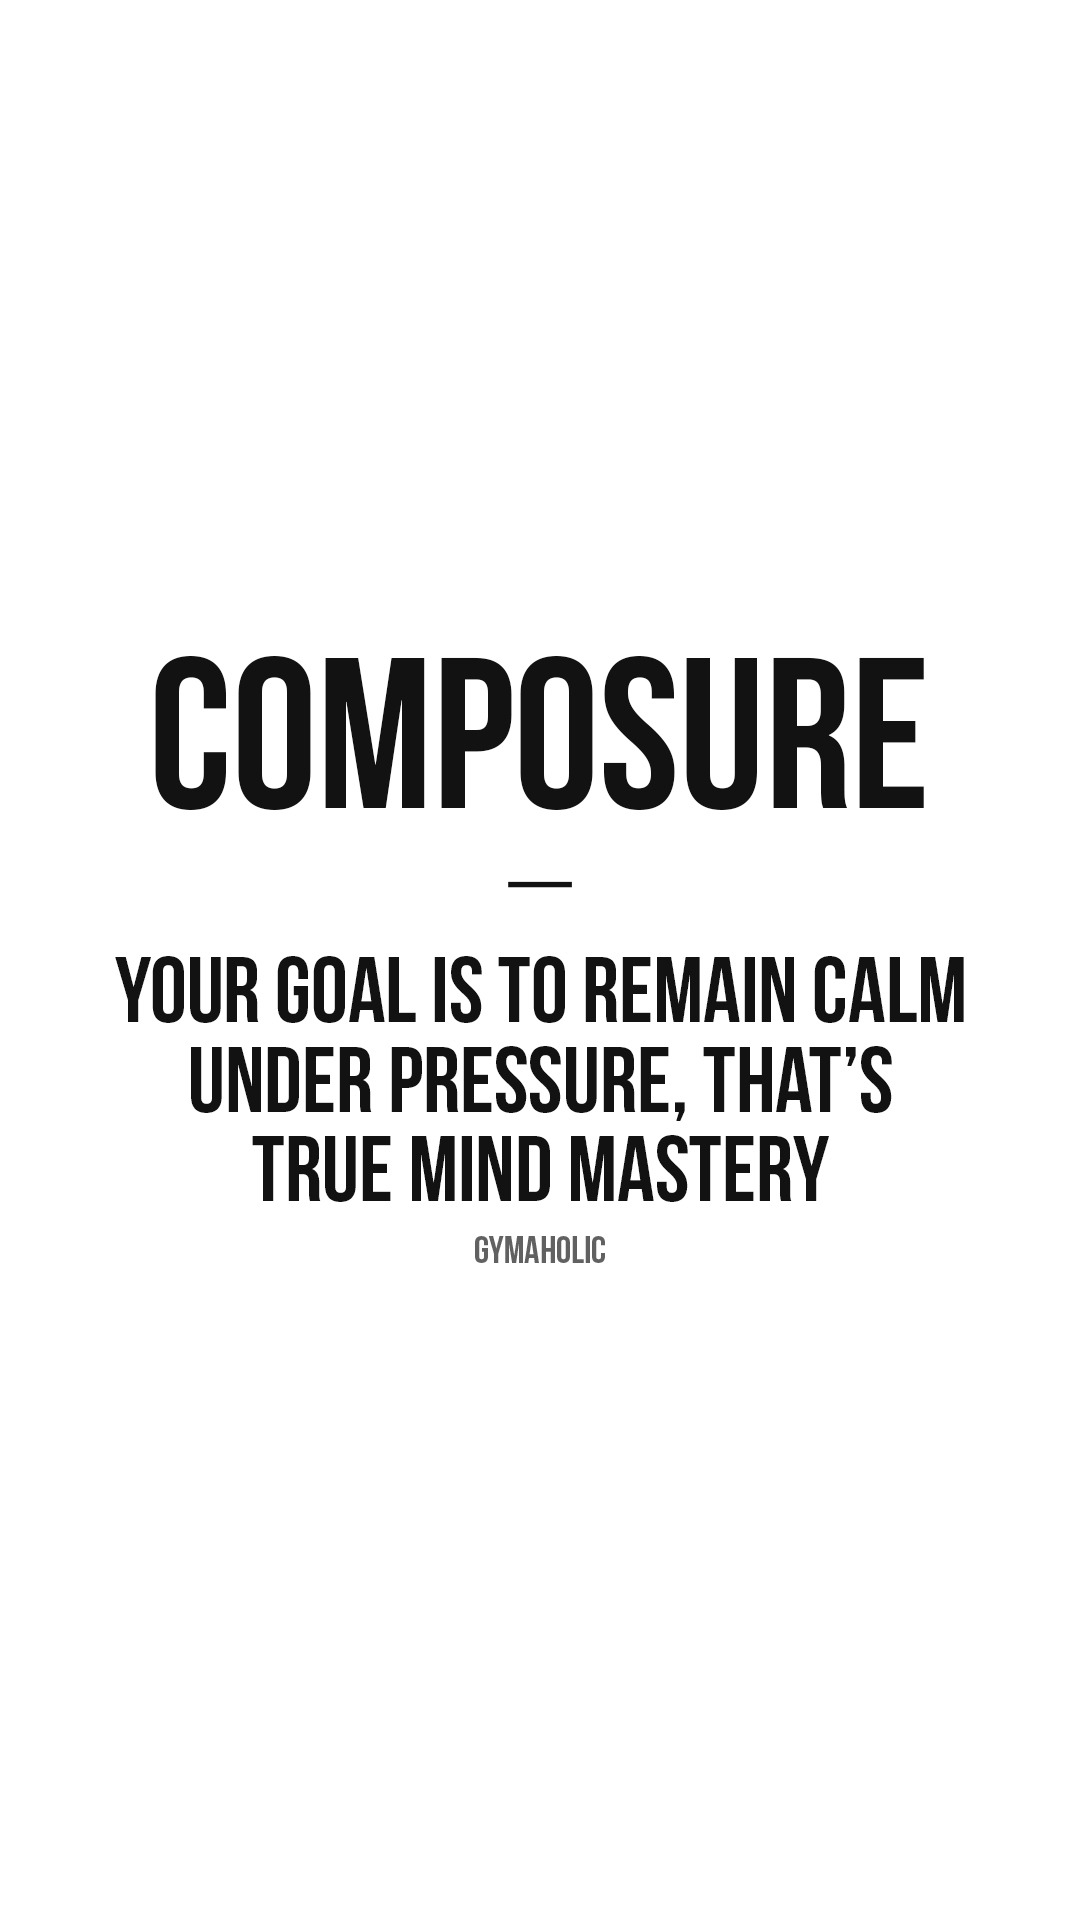 Composure: your goal is to remain calm under pressure